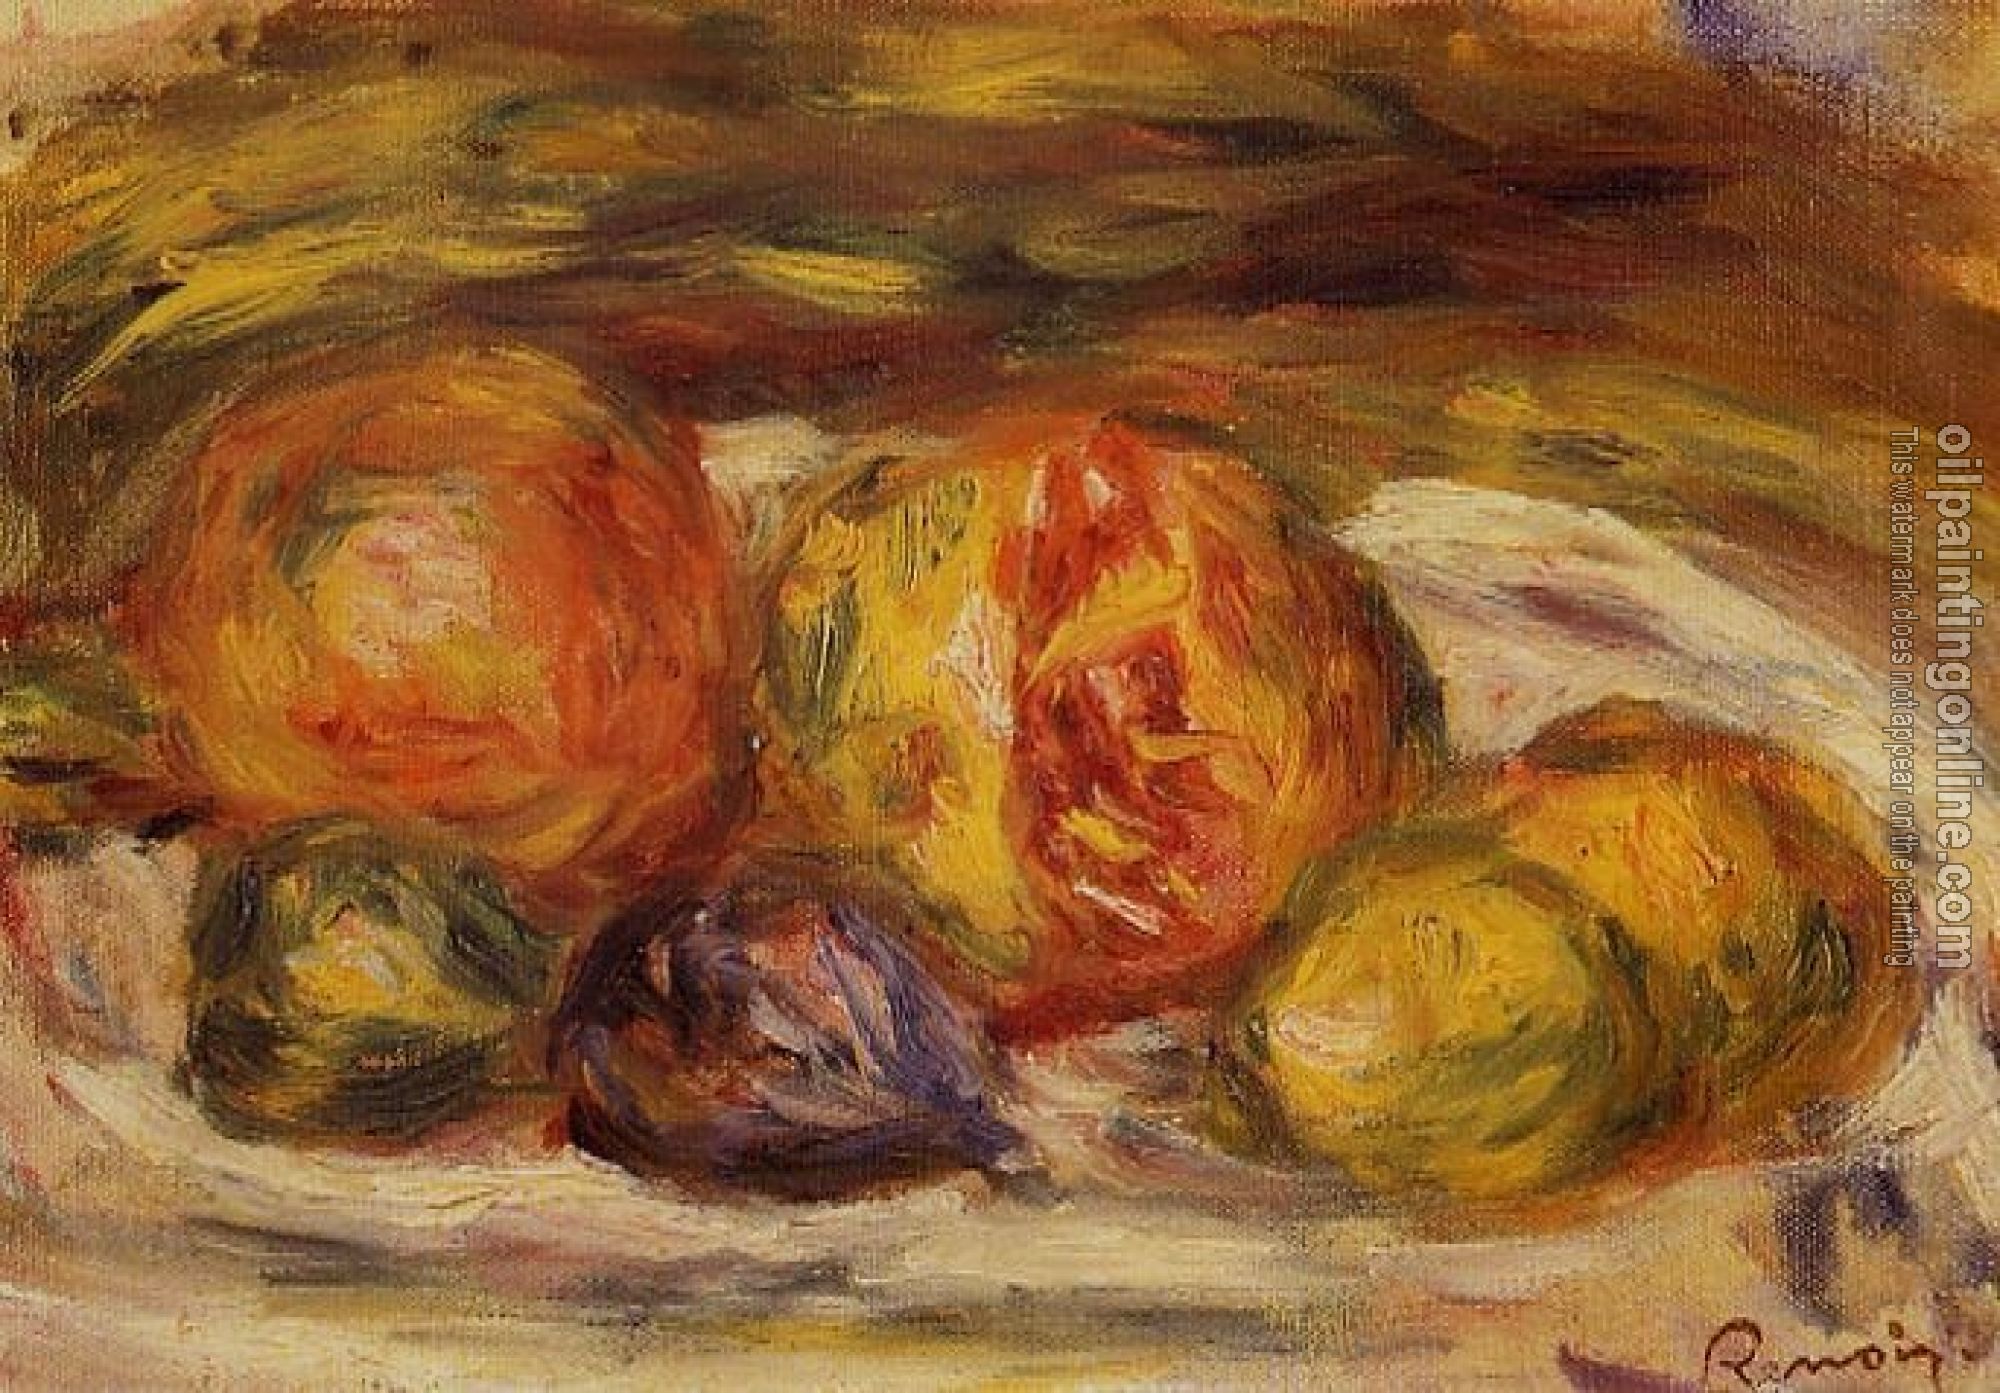 Renoir, Pierre Auguste - Pomegranate, Figs and Apples